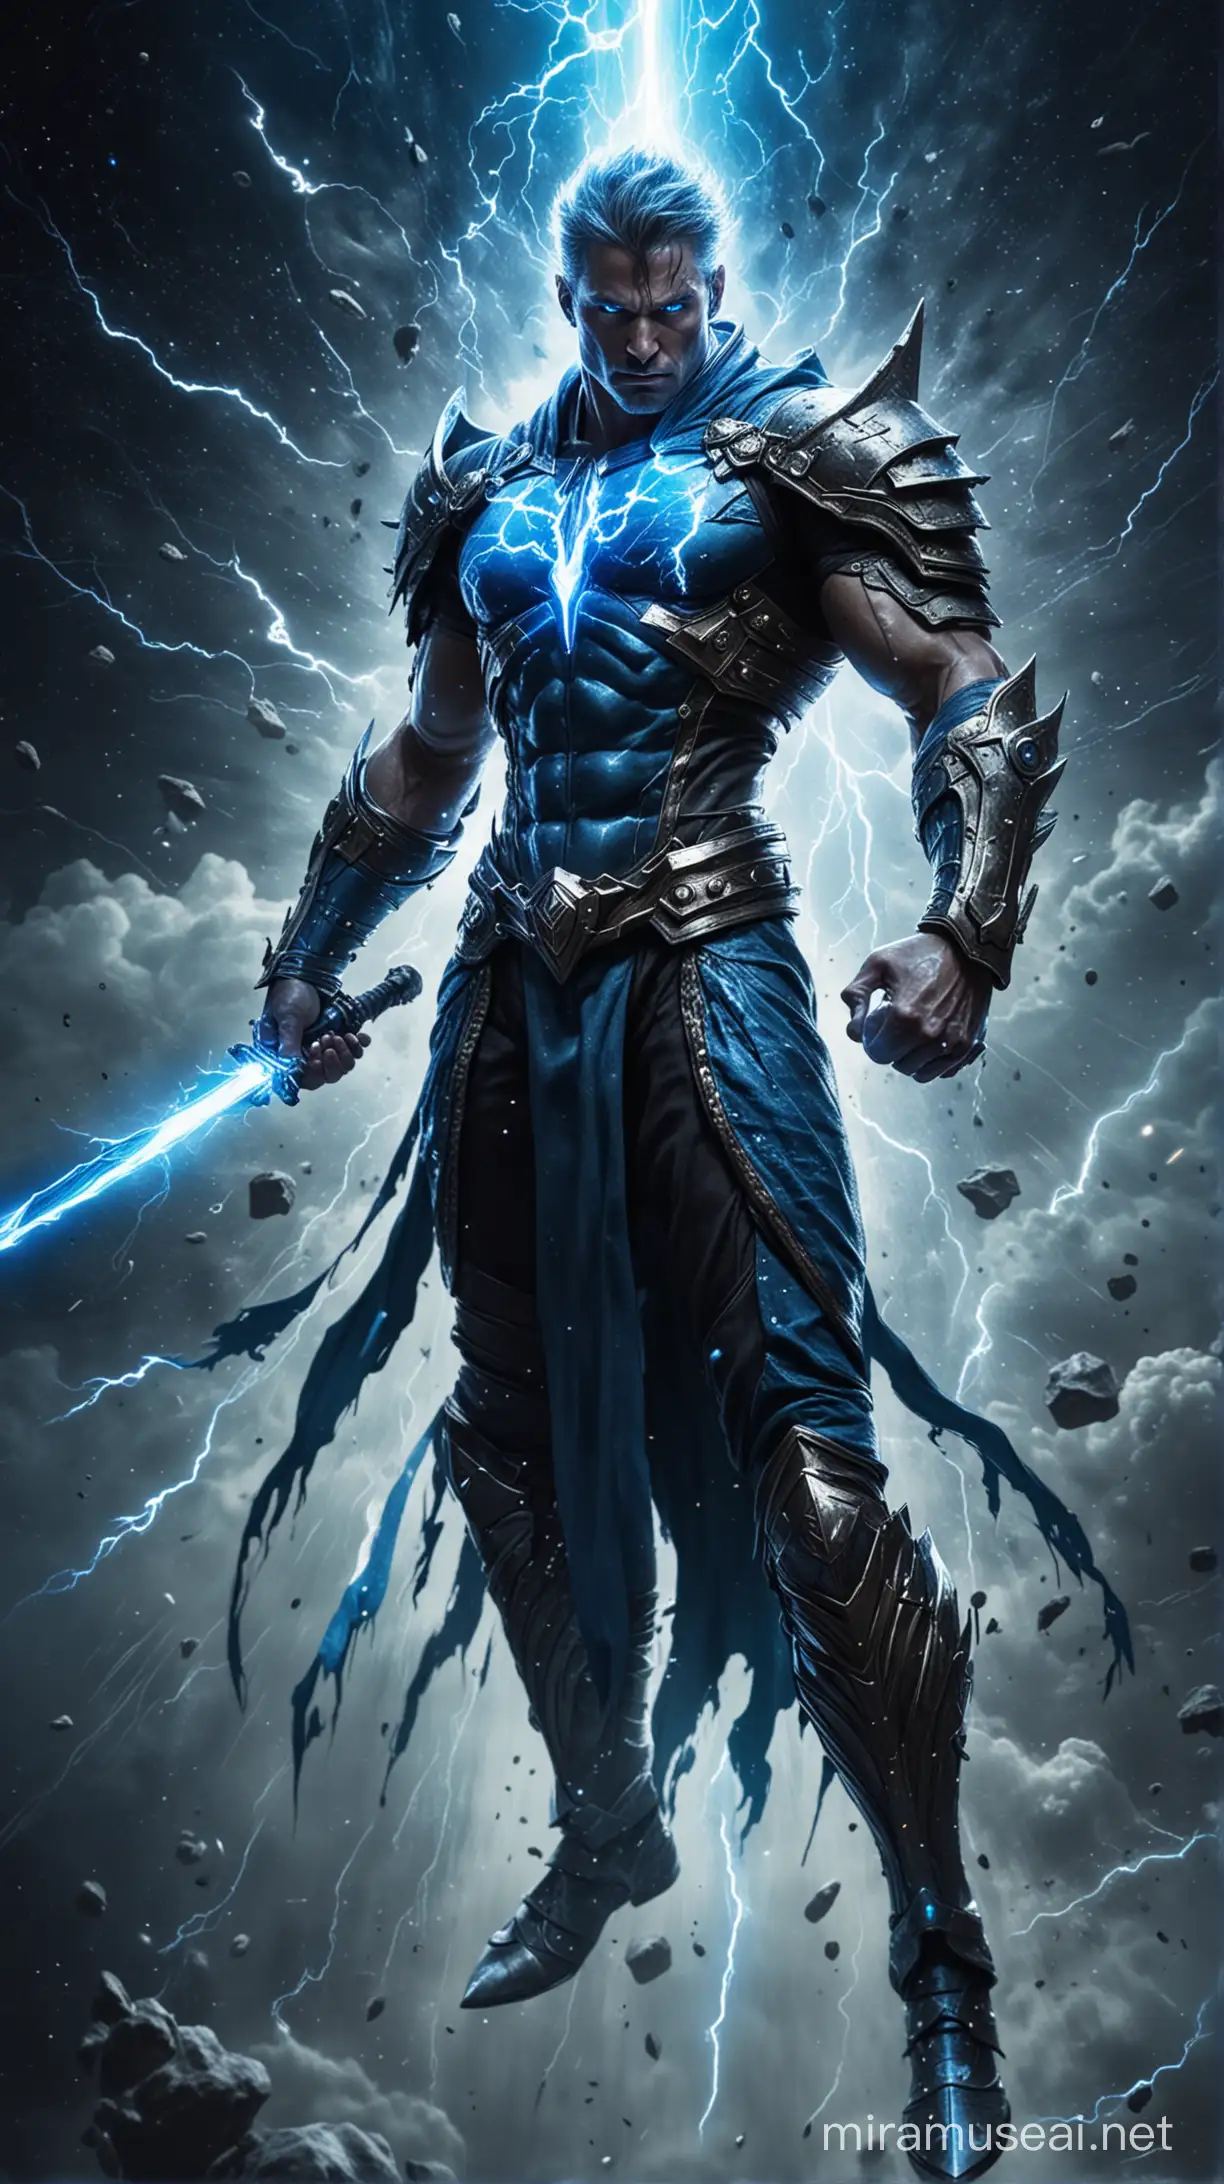 Cosmic Warrior with Blue Lightning and Detailed Sword